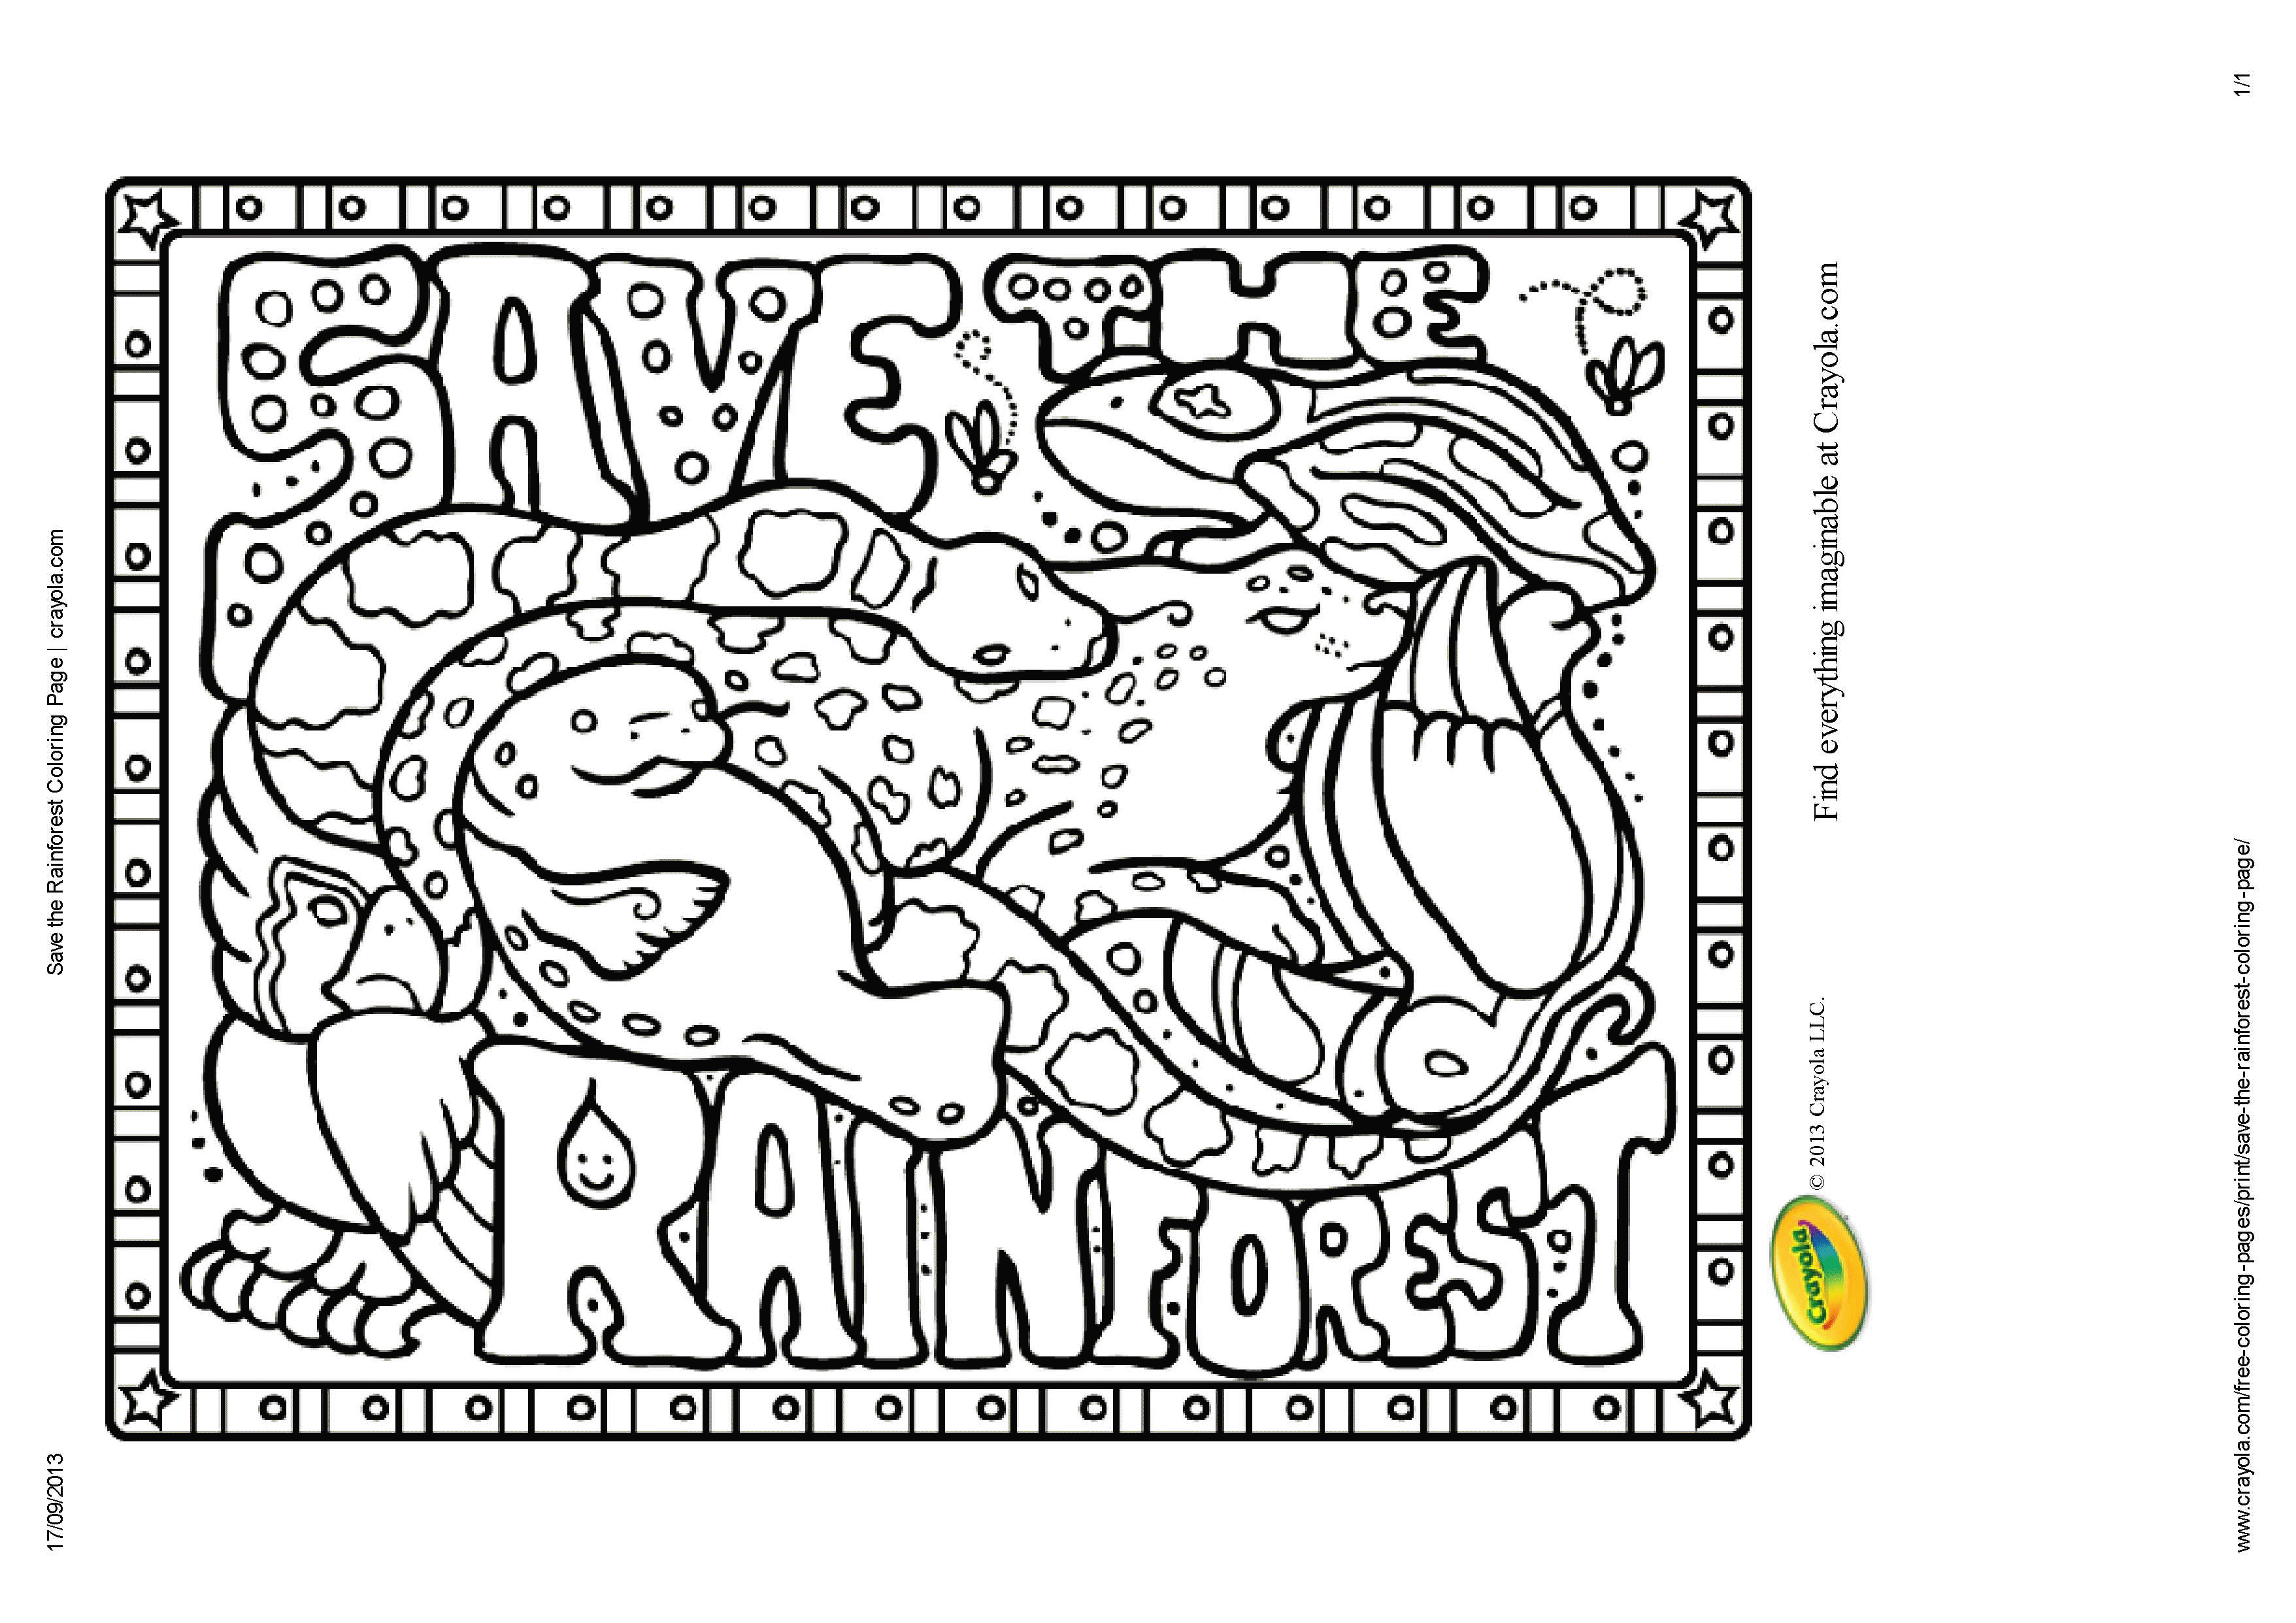 8 Pics of Rainforest Coloring Pages - Rainforest Animal Coloring ...